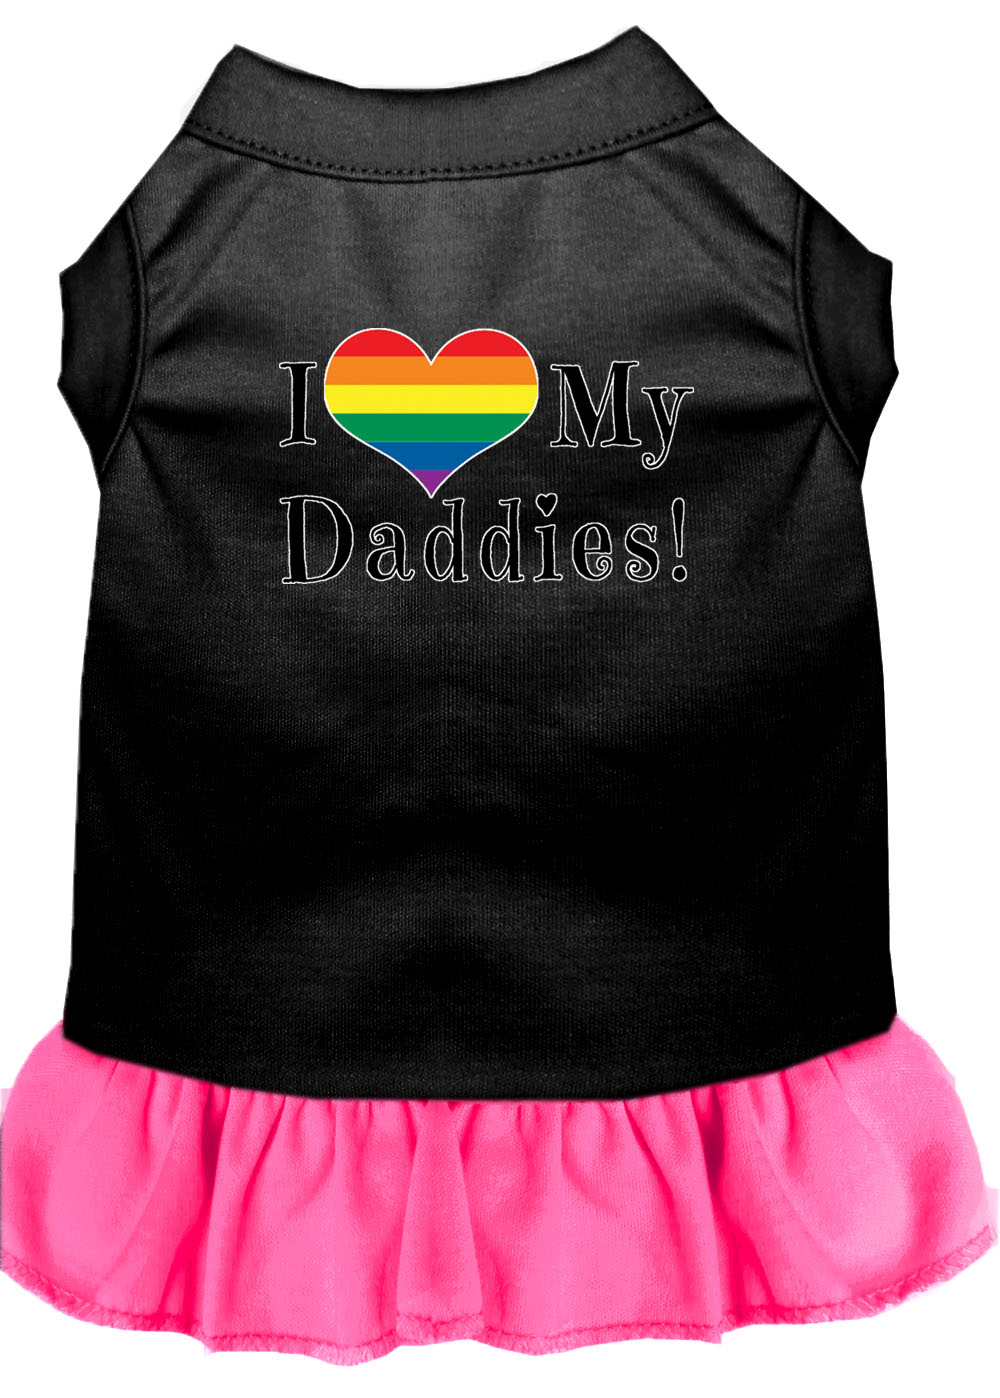 I Heart my Daddies Screen Print Dog Dress Black with Bright Pink Med